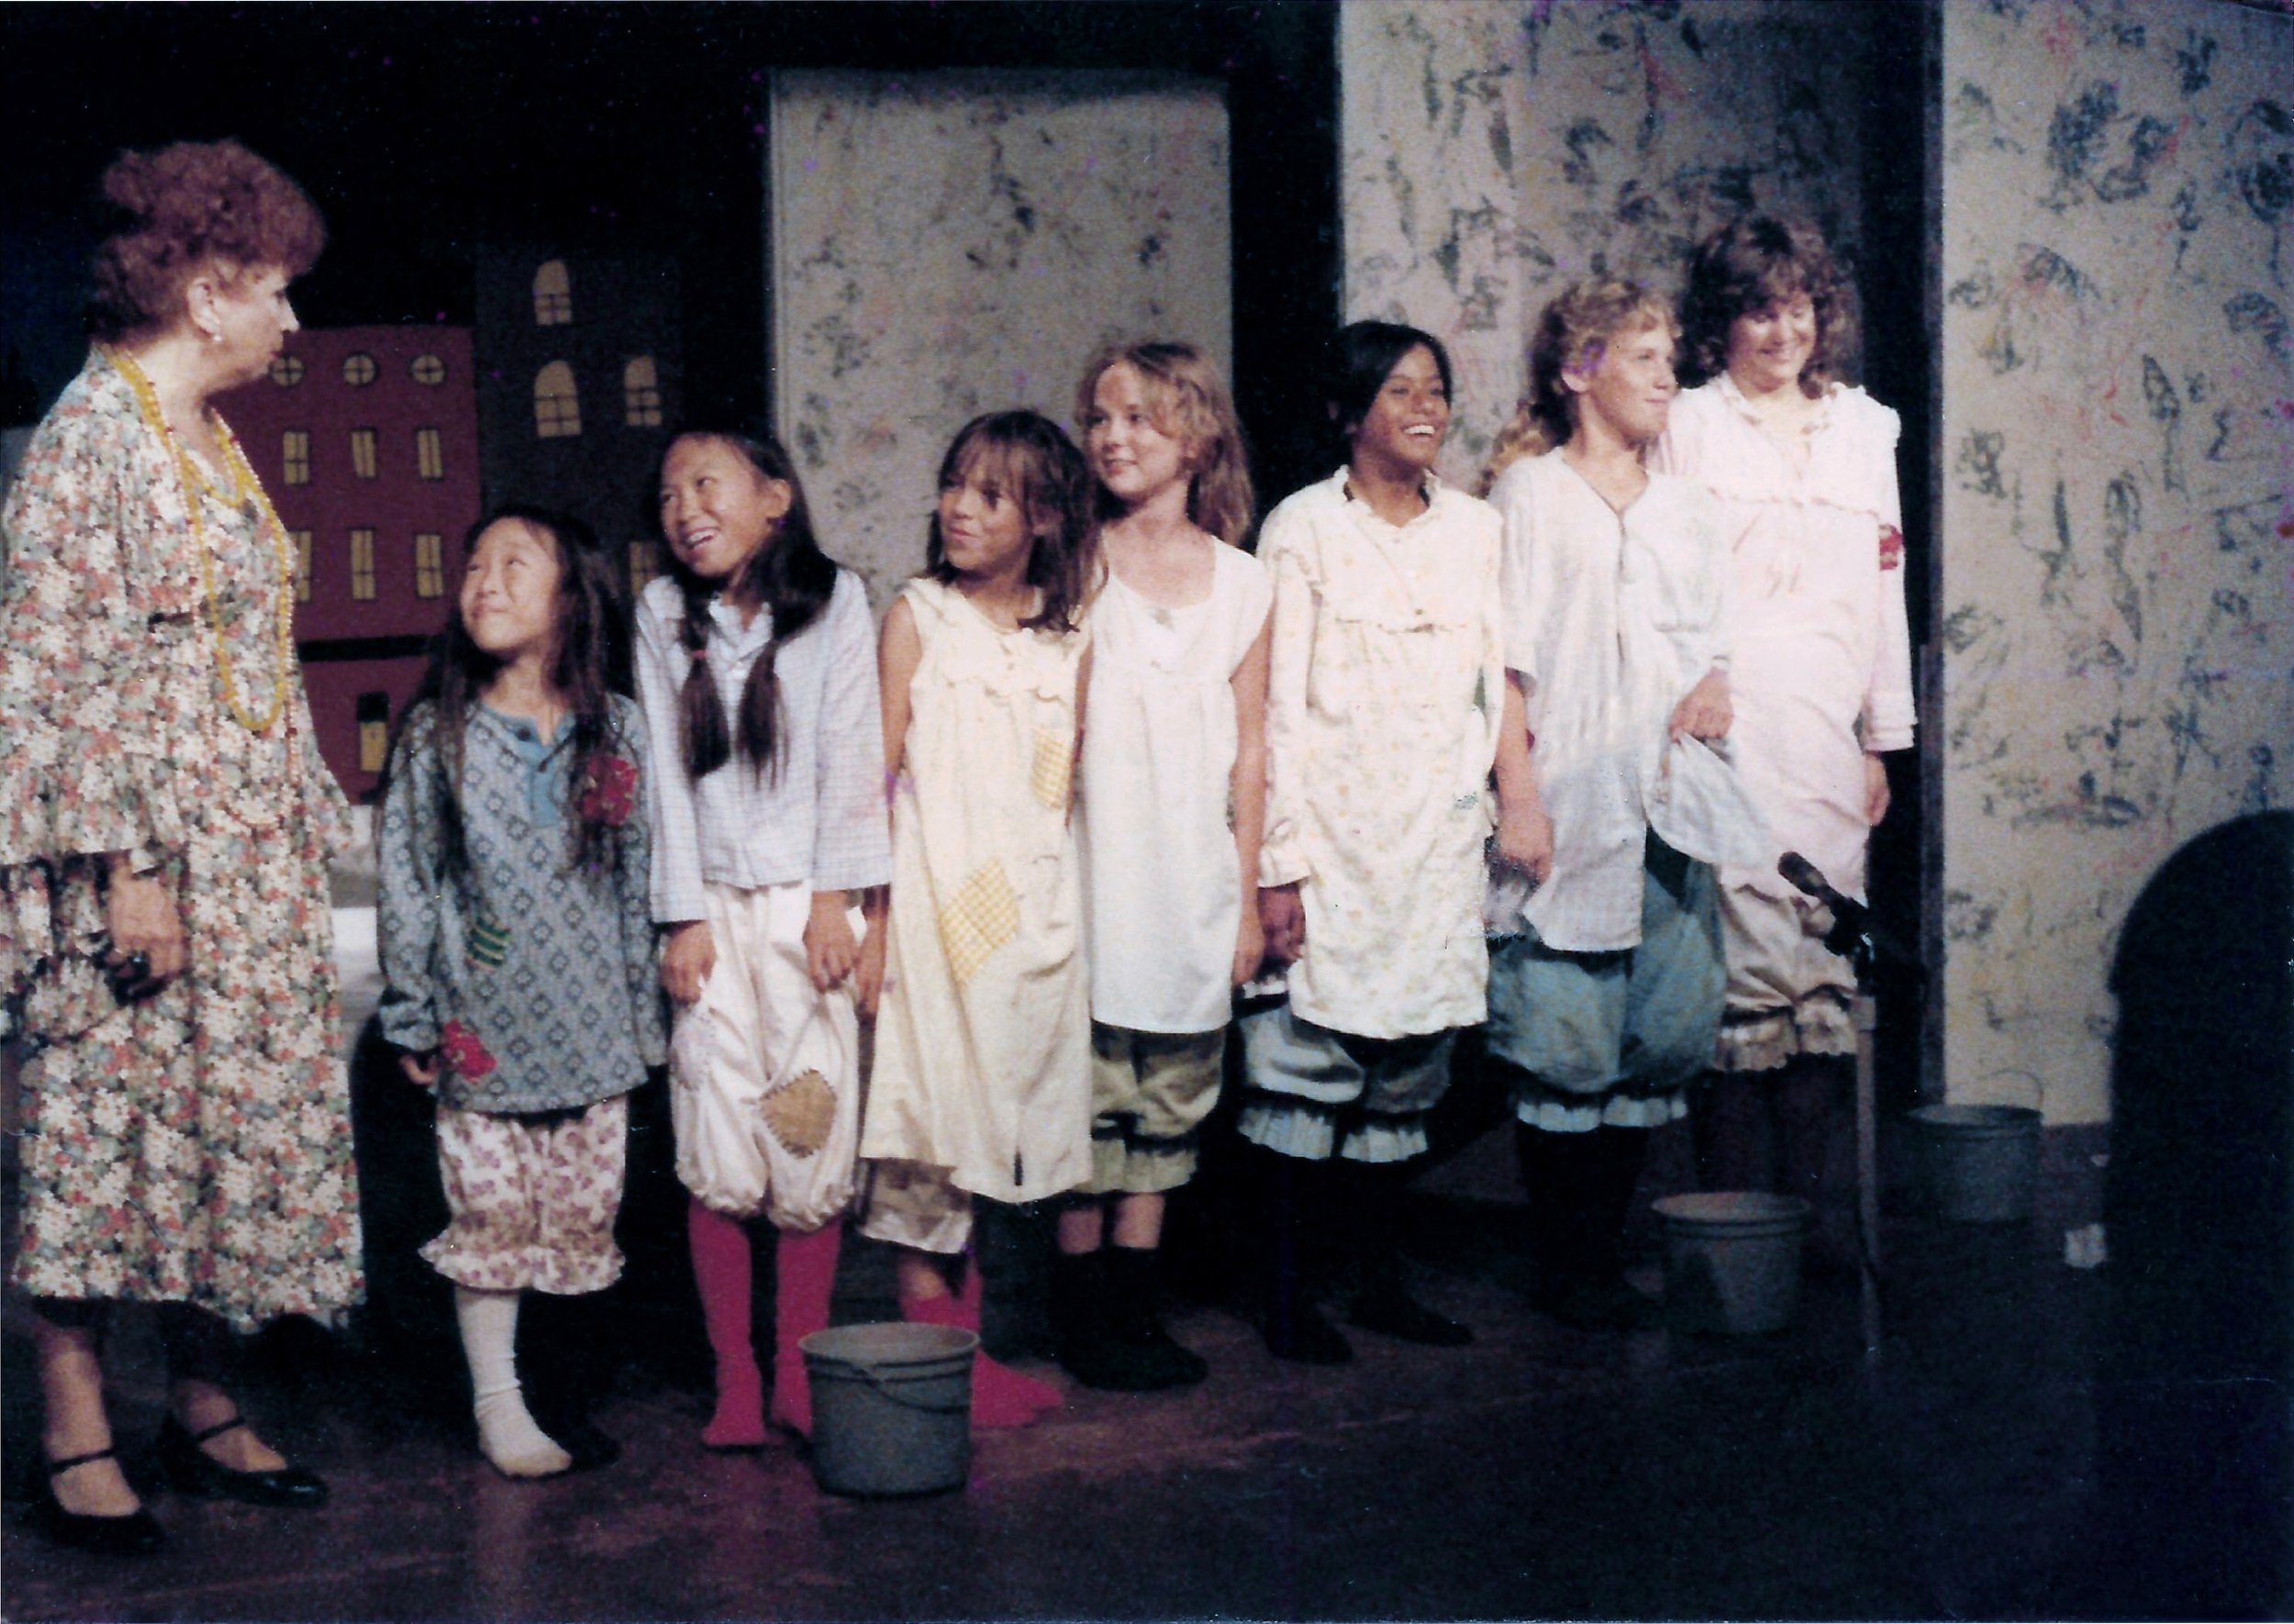 Maui Youth Theatre's 1985 production of ANNIE.